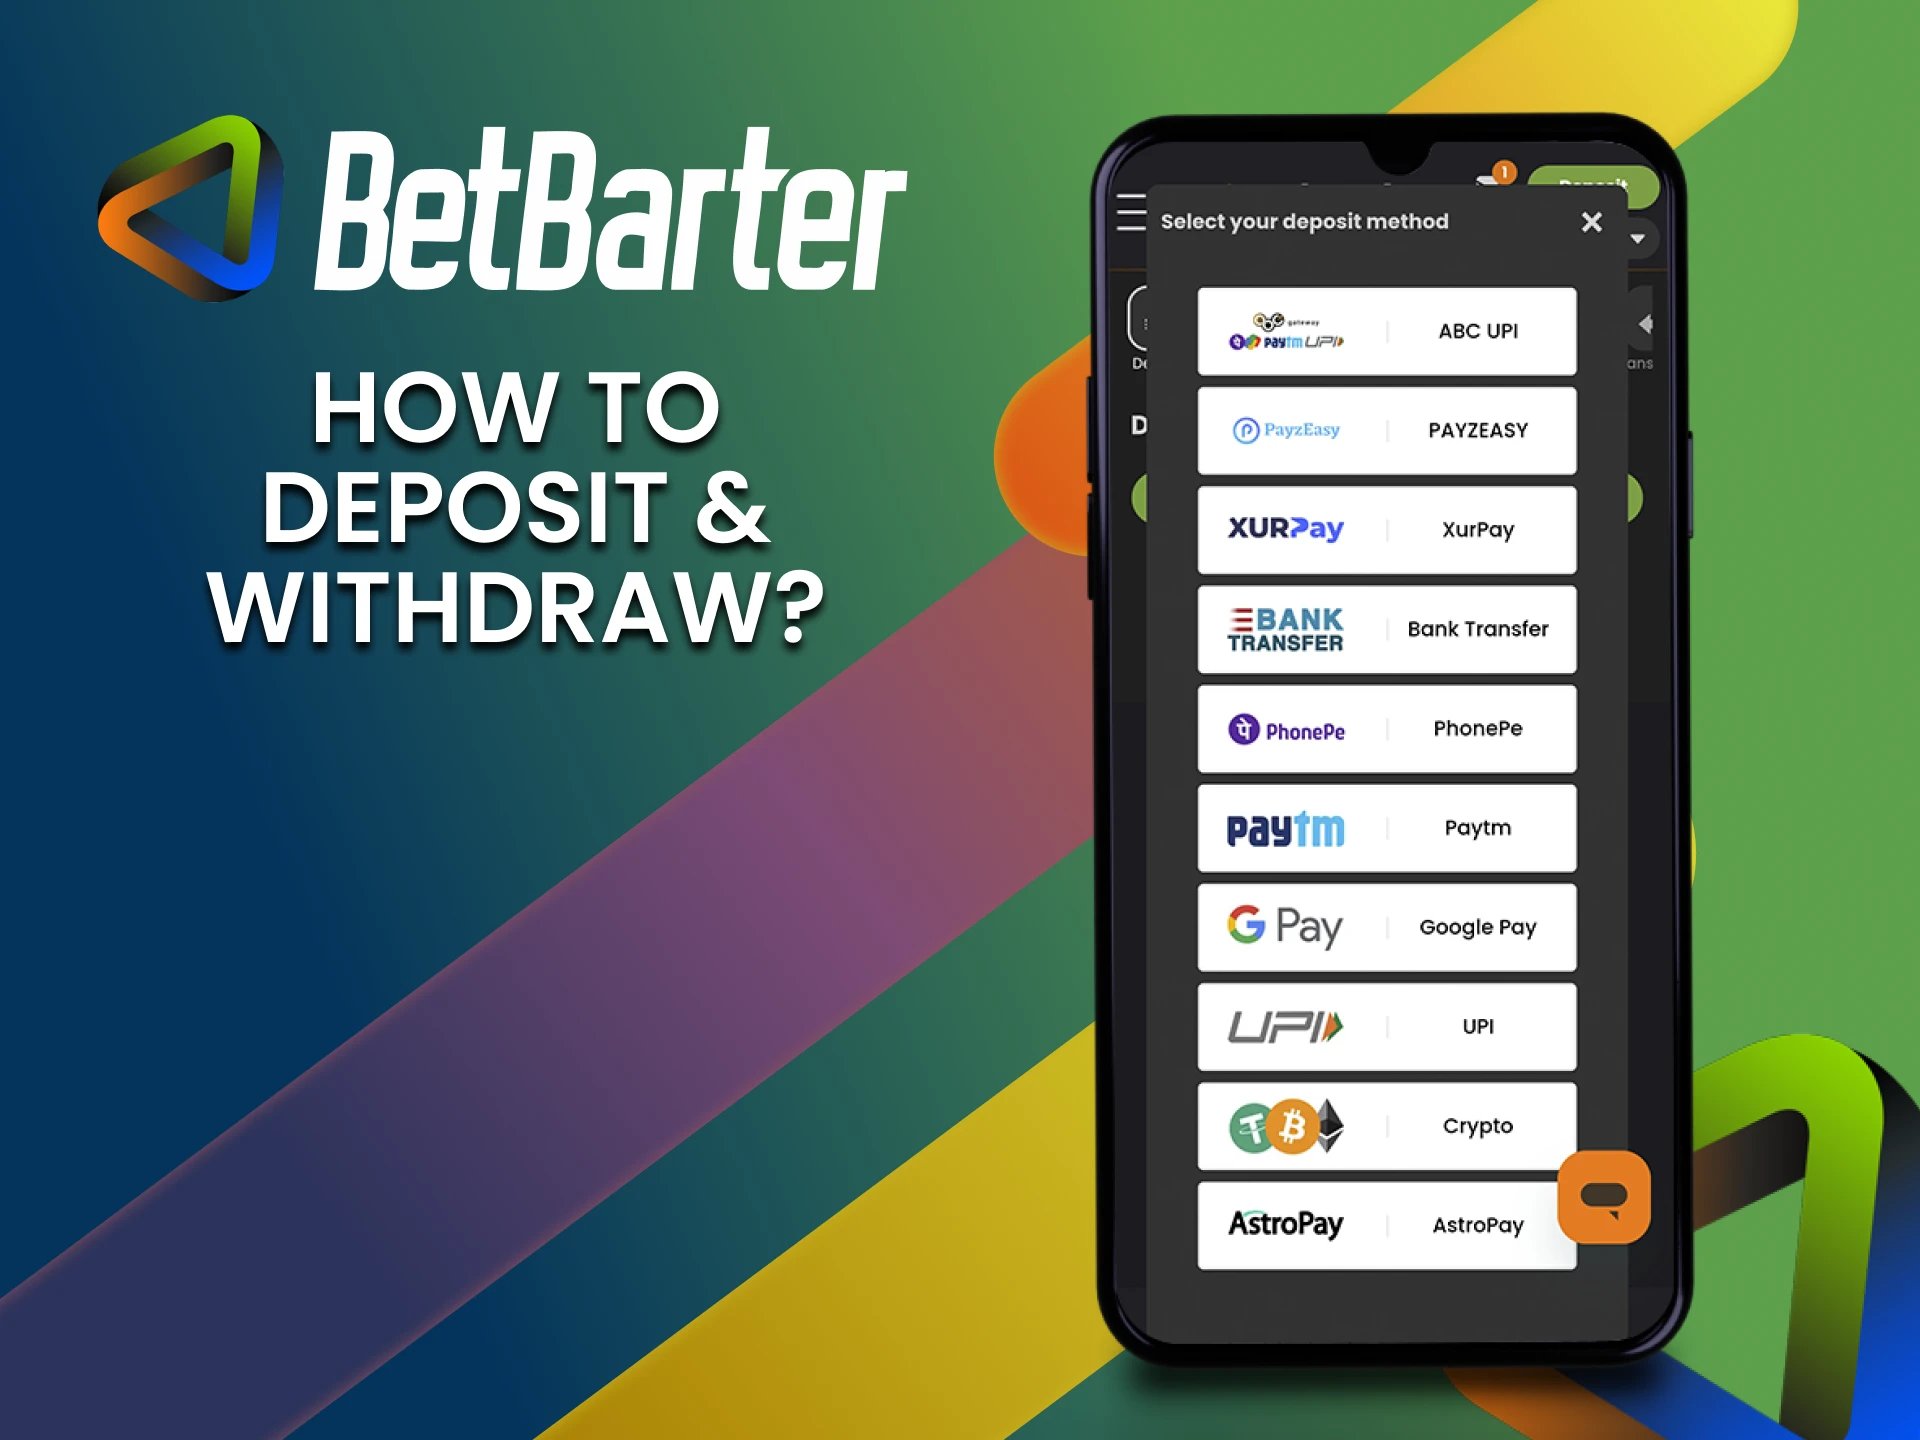 Our simple guide will help players from India to fund money to their accounts in BetBarter and start betting.